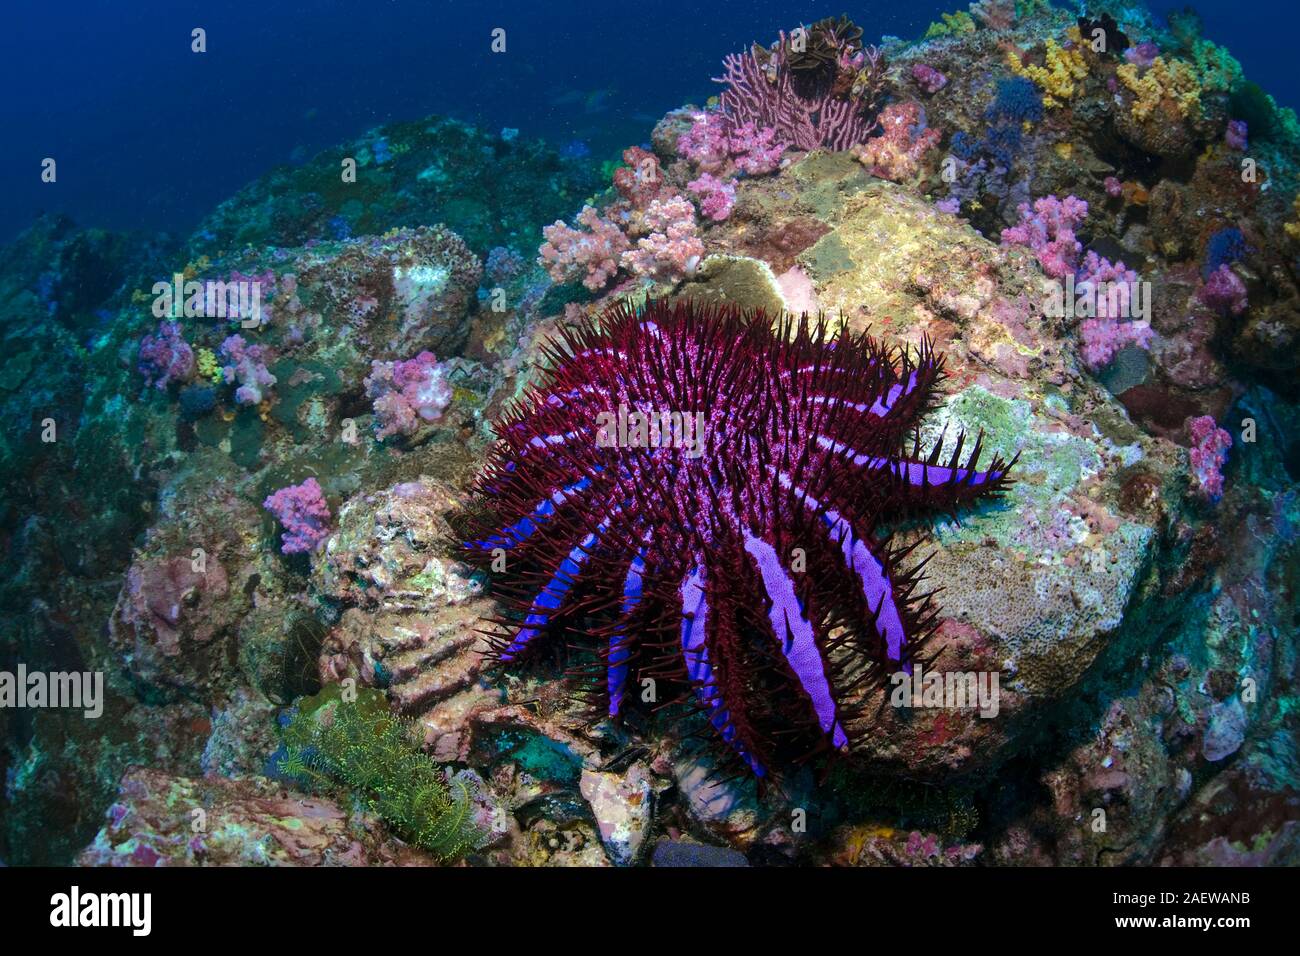 Crown of thorns starfish (Acanthaster planci) feeds polyps of a stone coral, the dead coral is visible on the nearly white colour, Burma, Myanmar Stock Photo